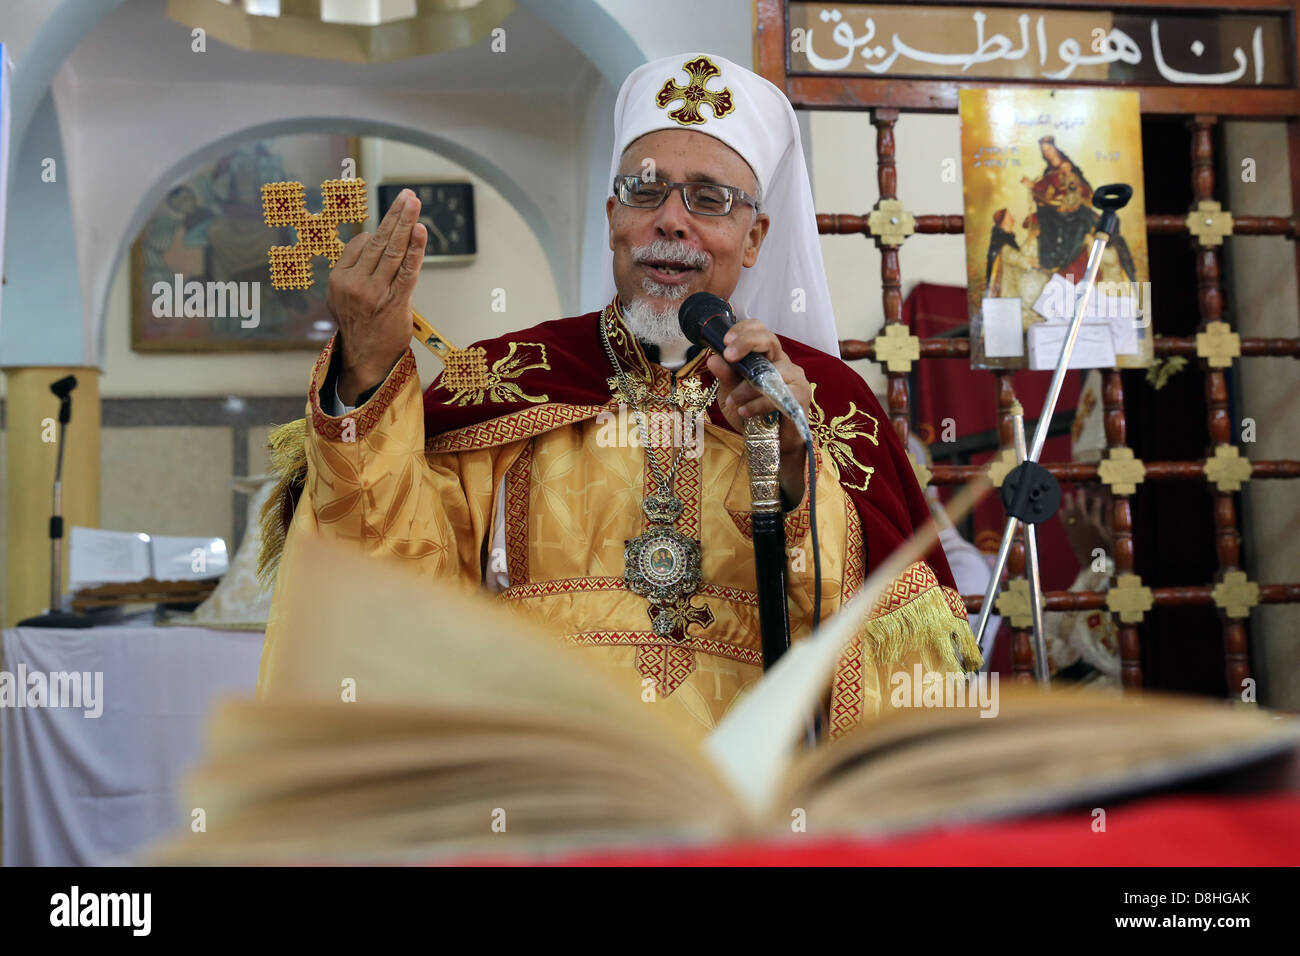 catholic coptic bishop KYRILLOS WILLIAM of Asyut diocese at a church service in Al Ghanayem church, Egypt Stock Photo